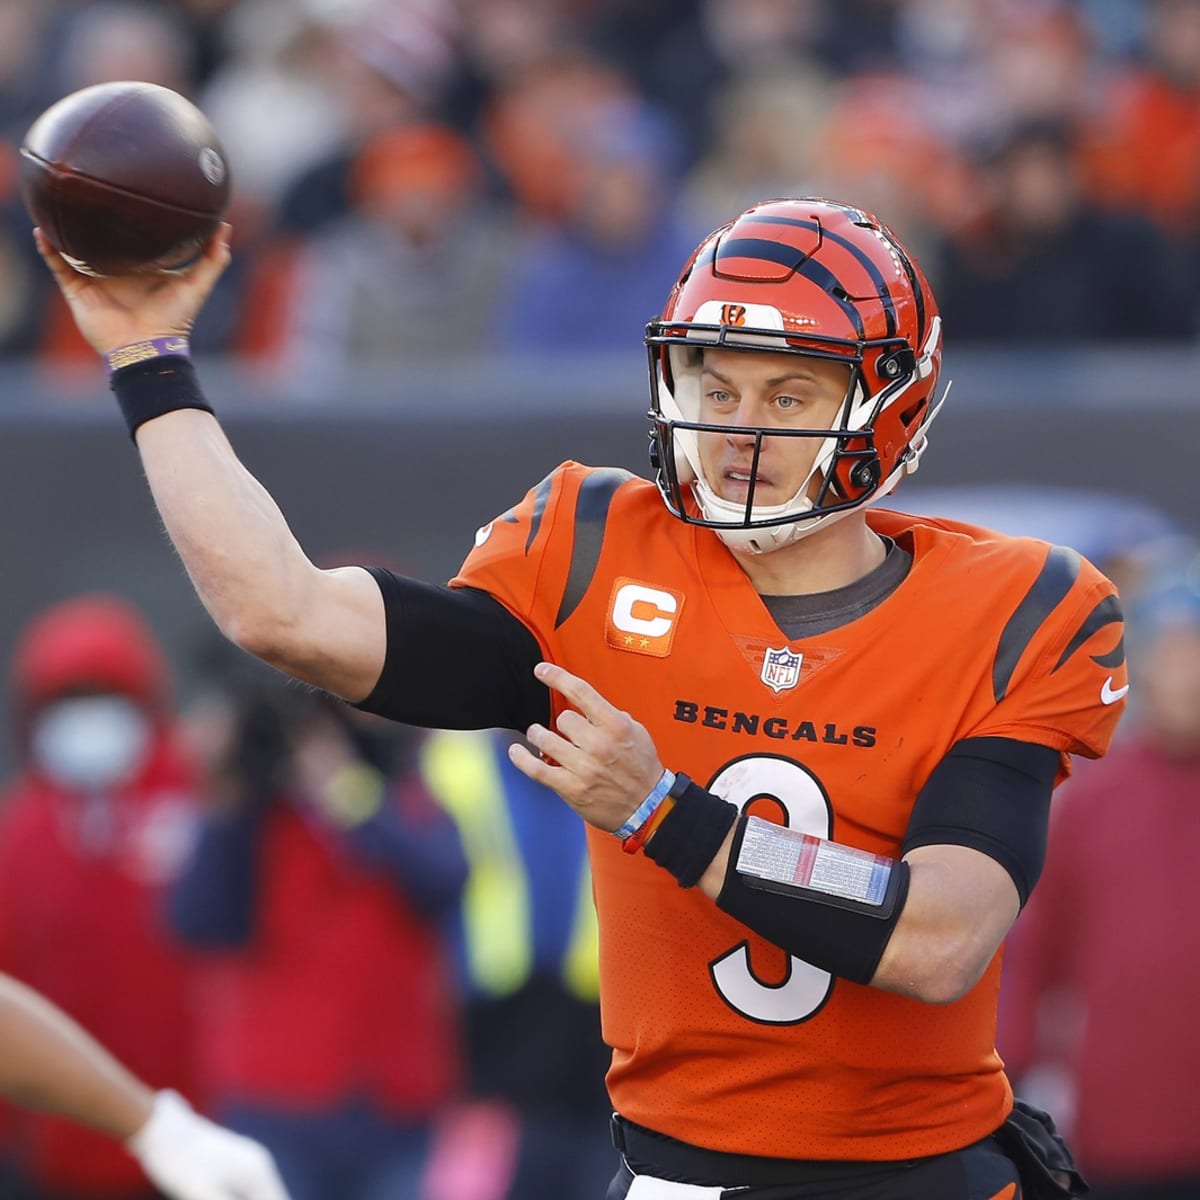 Player Prowl: Panthers play it cool with Bengals QB Joe Burrow